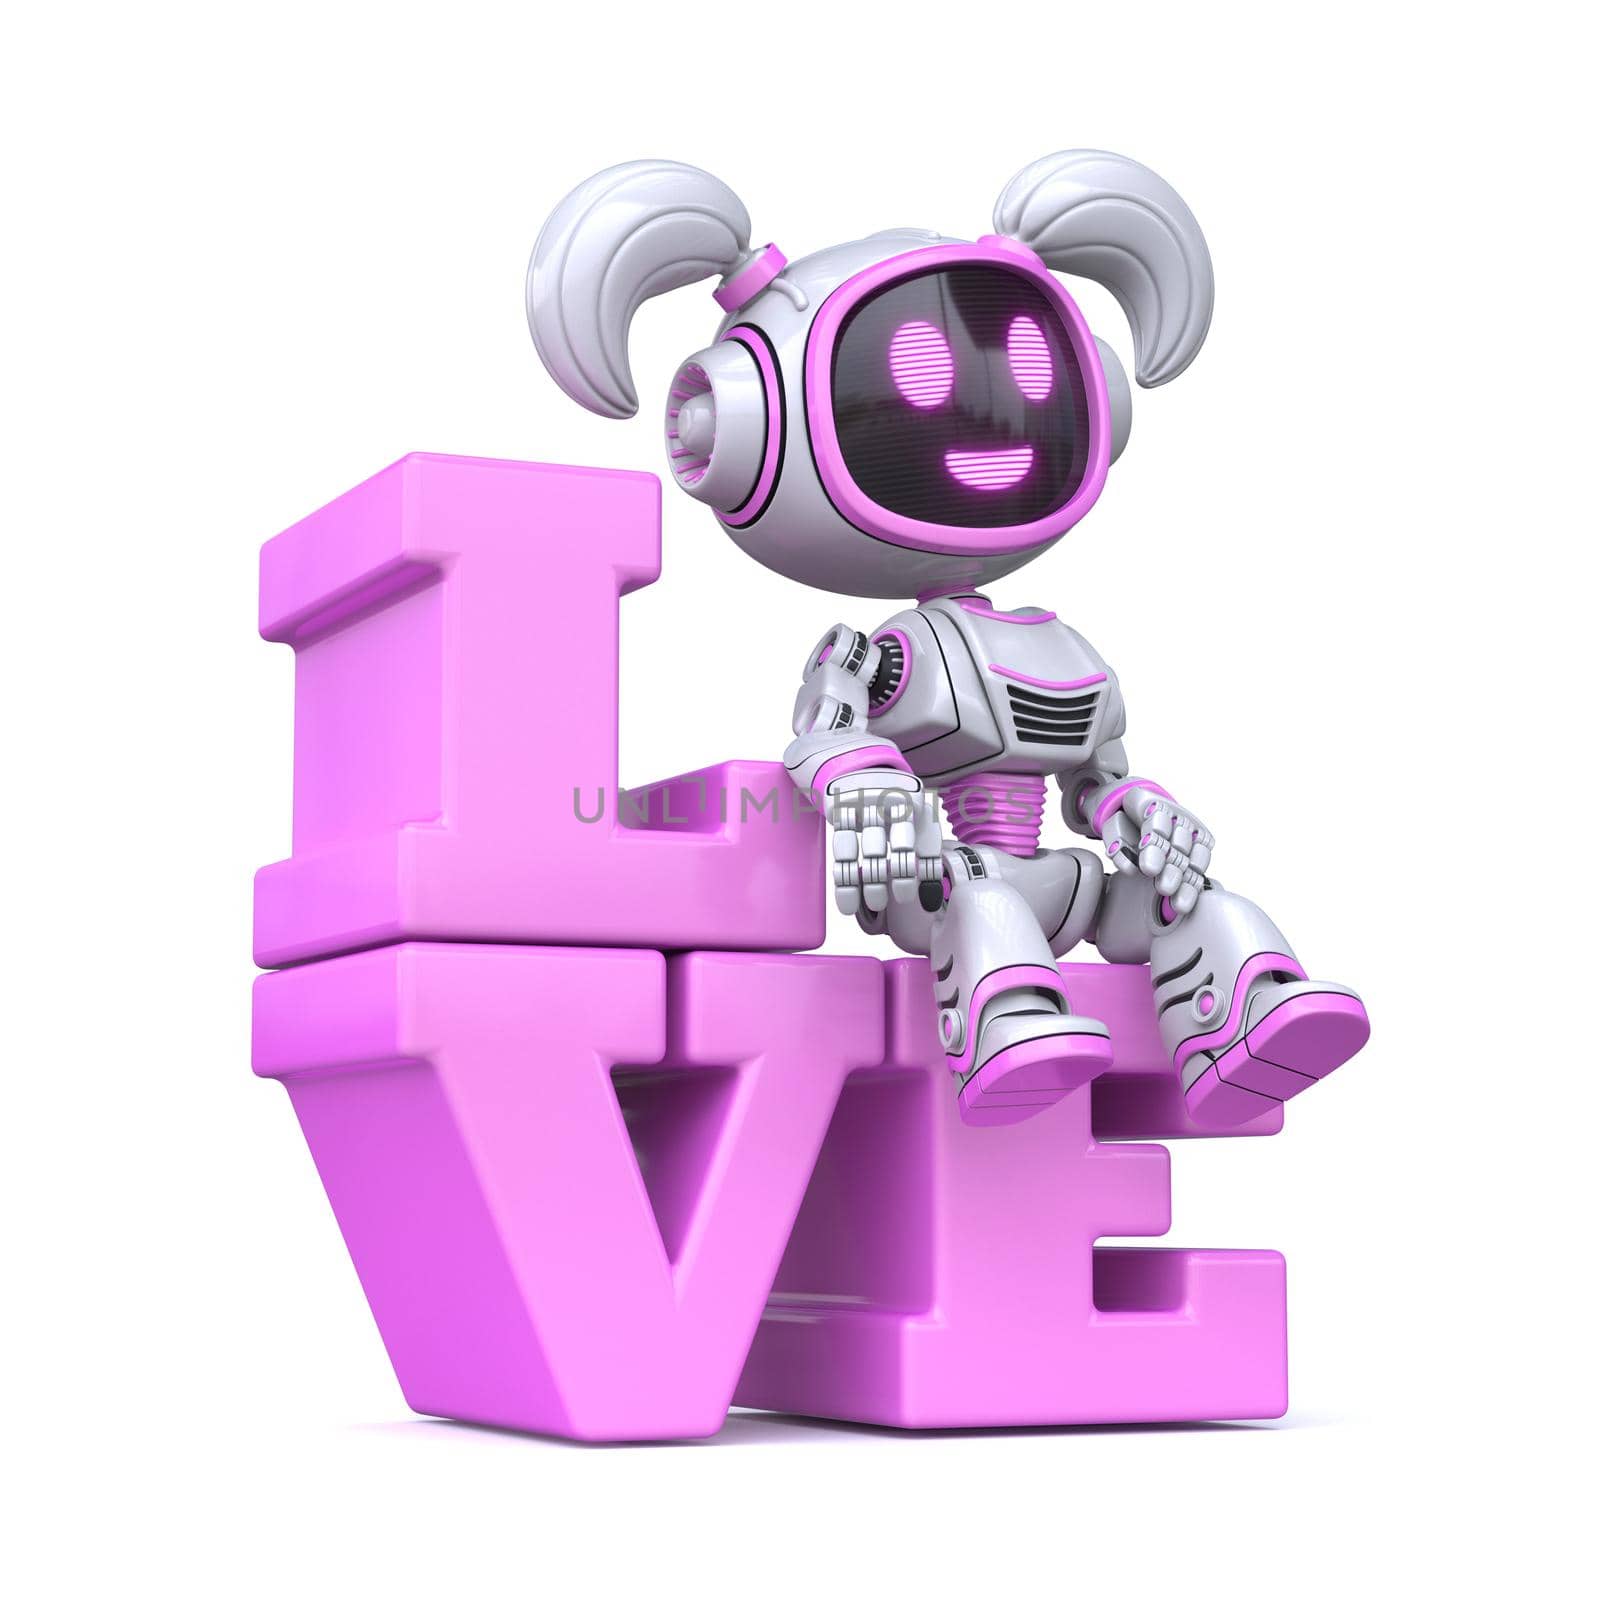 Cute pink girl robot sitting on LOVE word 3D by djmilic